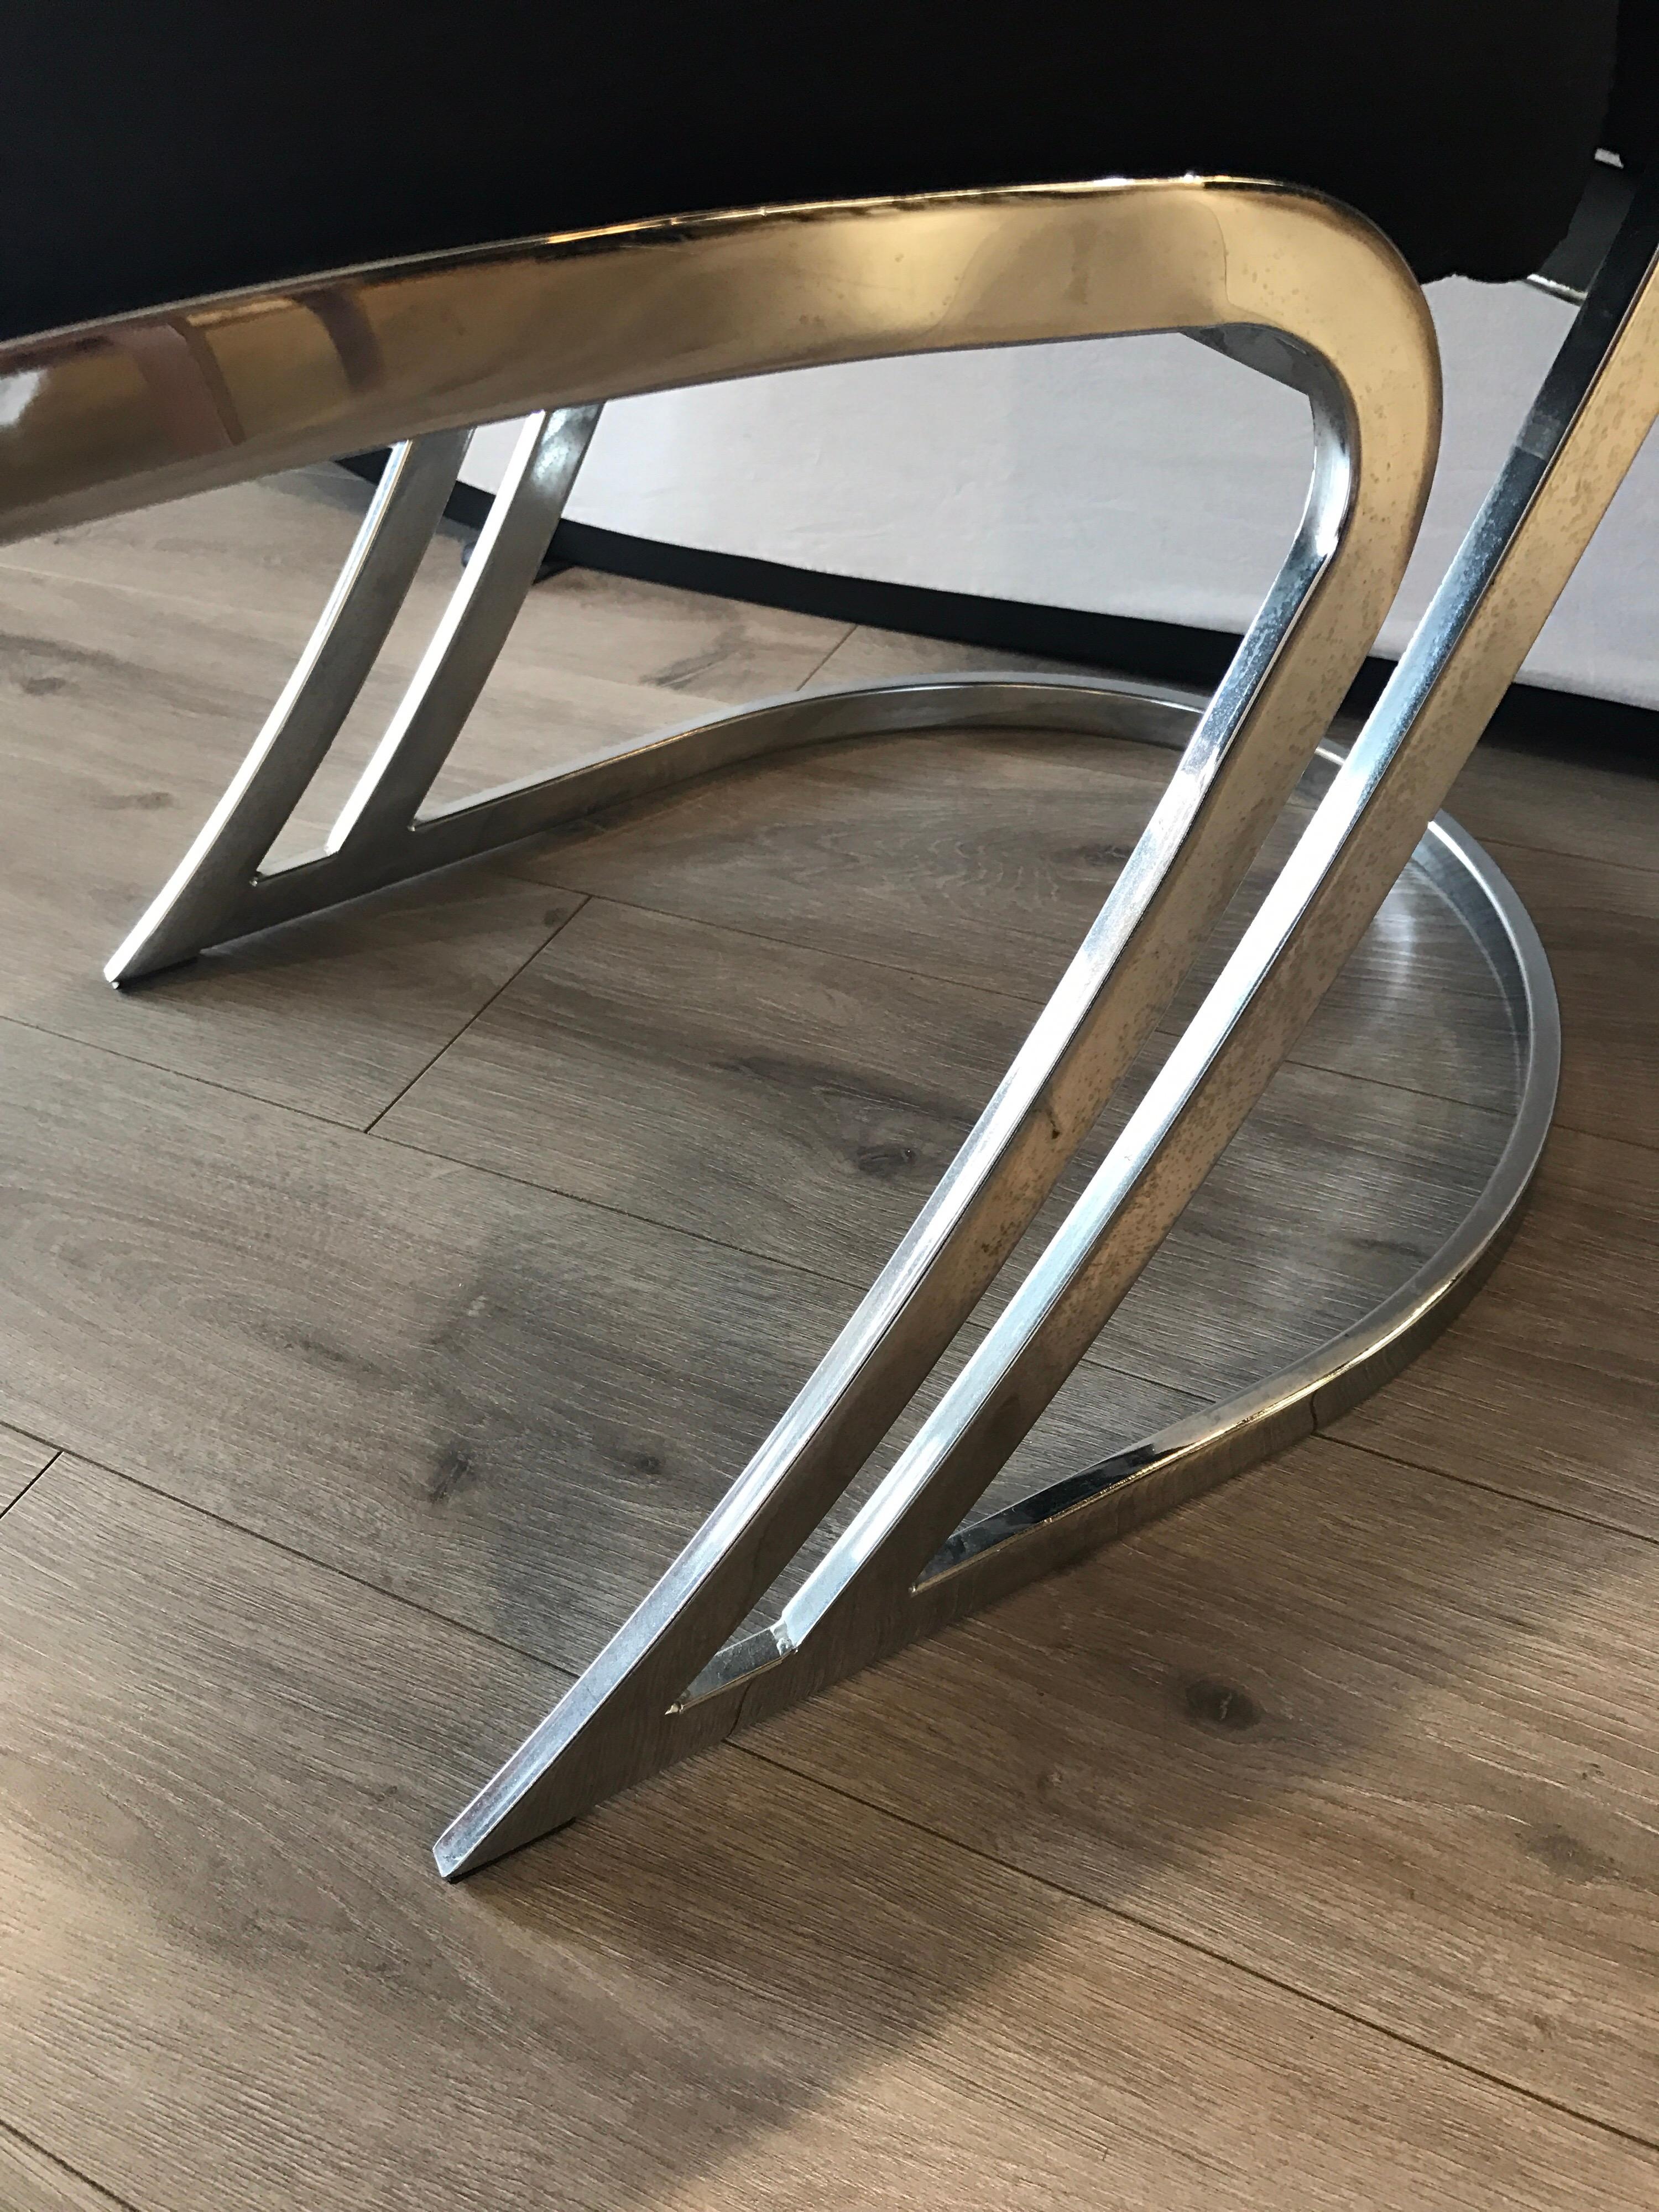 American Pierre Cardin Mid-Century Modern Chrome Z Chairs Set of Four